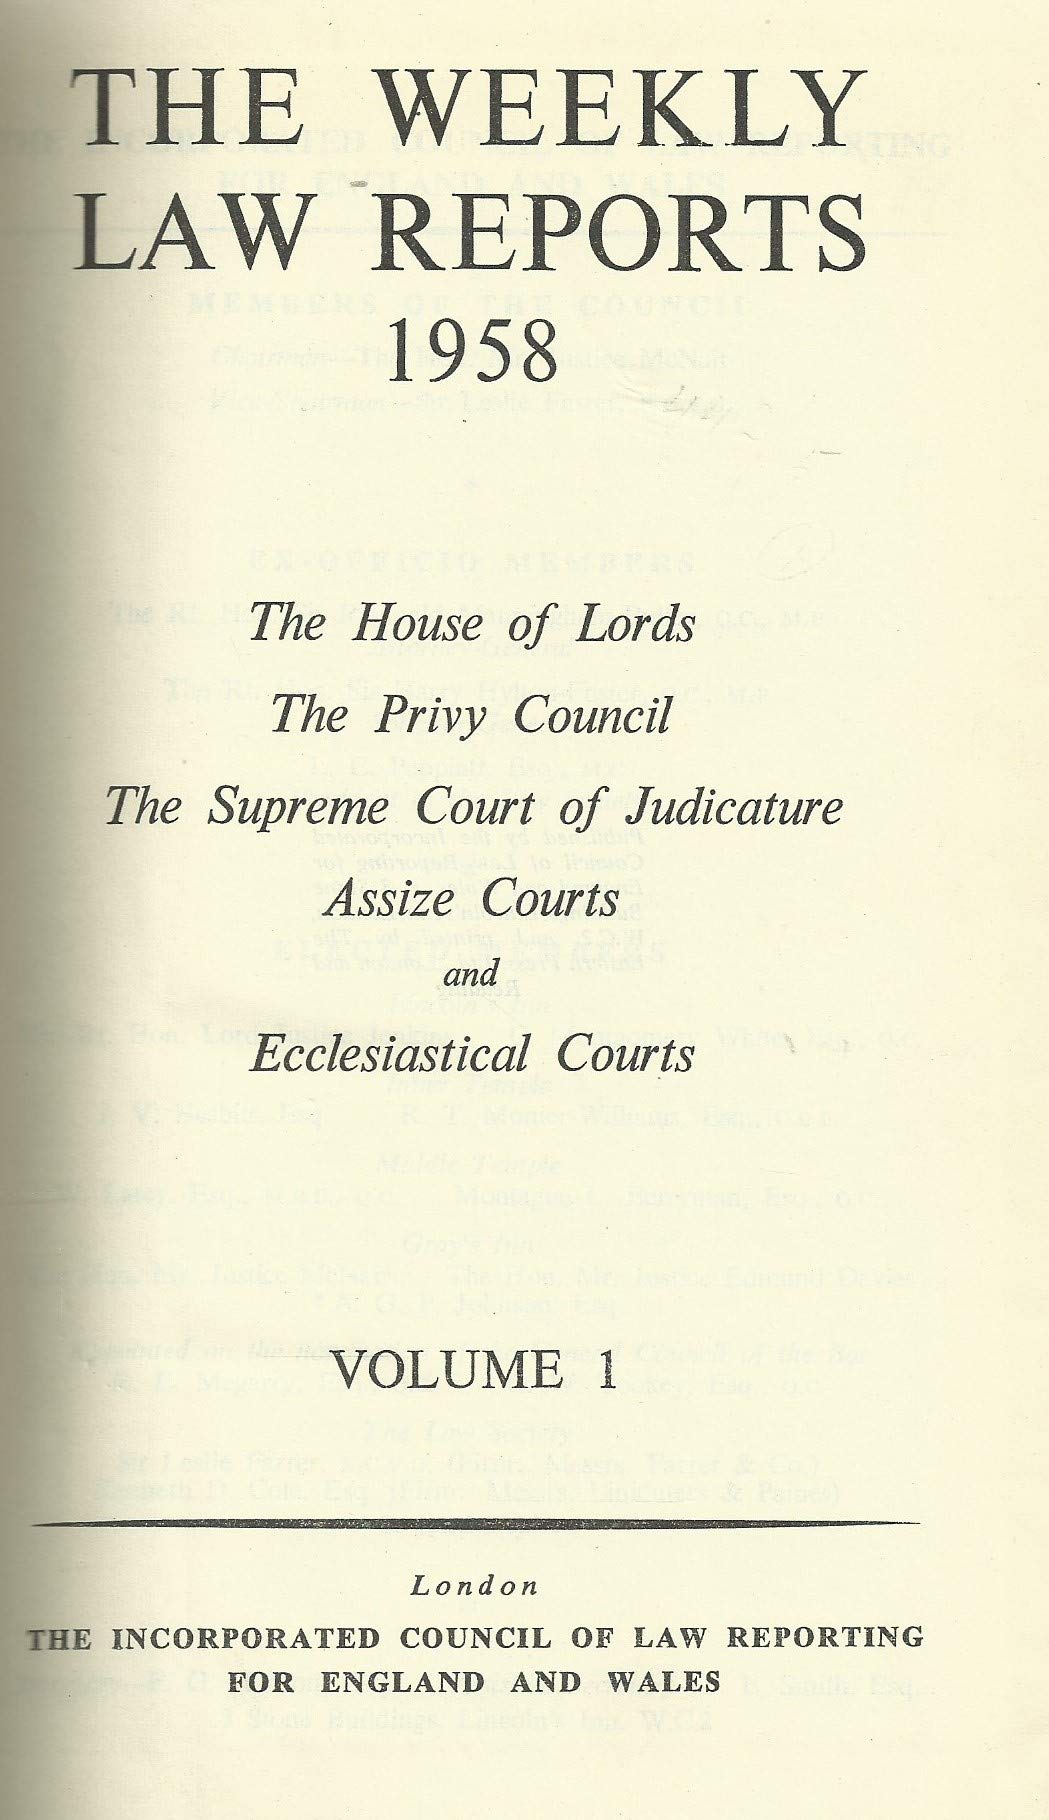 THE WEEKLY LAW REPORTS 1958: THE HOUSE OF LORDS, THE PRIVY COUNCIL, THE SUPREME COURT OF JUDICATURE, ASSIZE COURTS AND ECCLESIASTICAL COURTS VOLUME I.